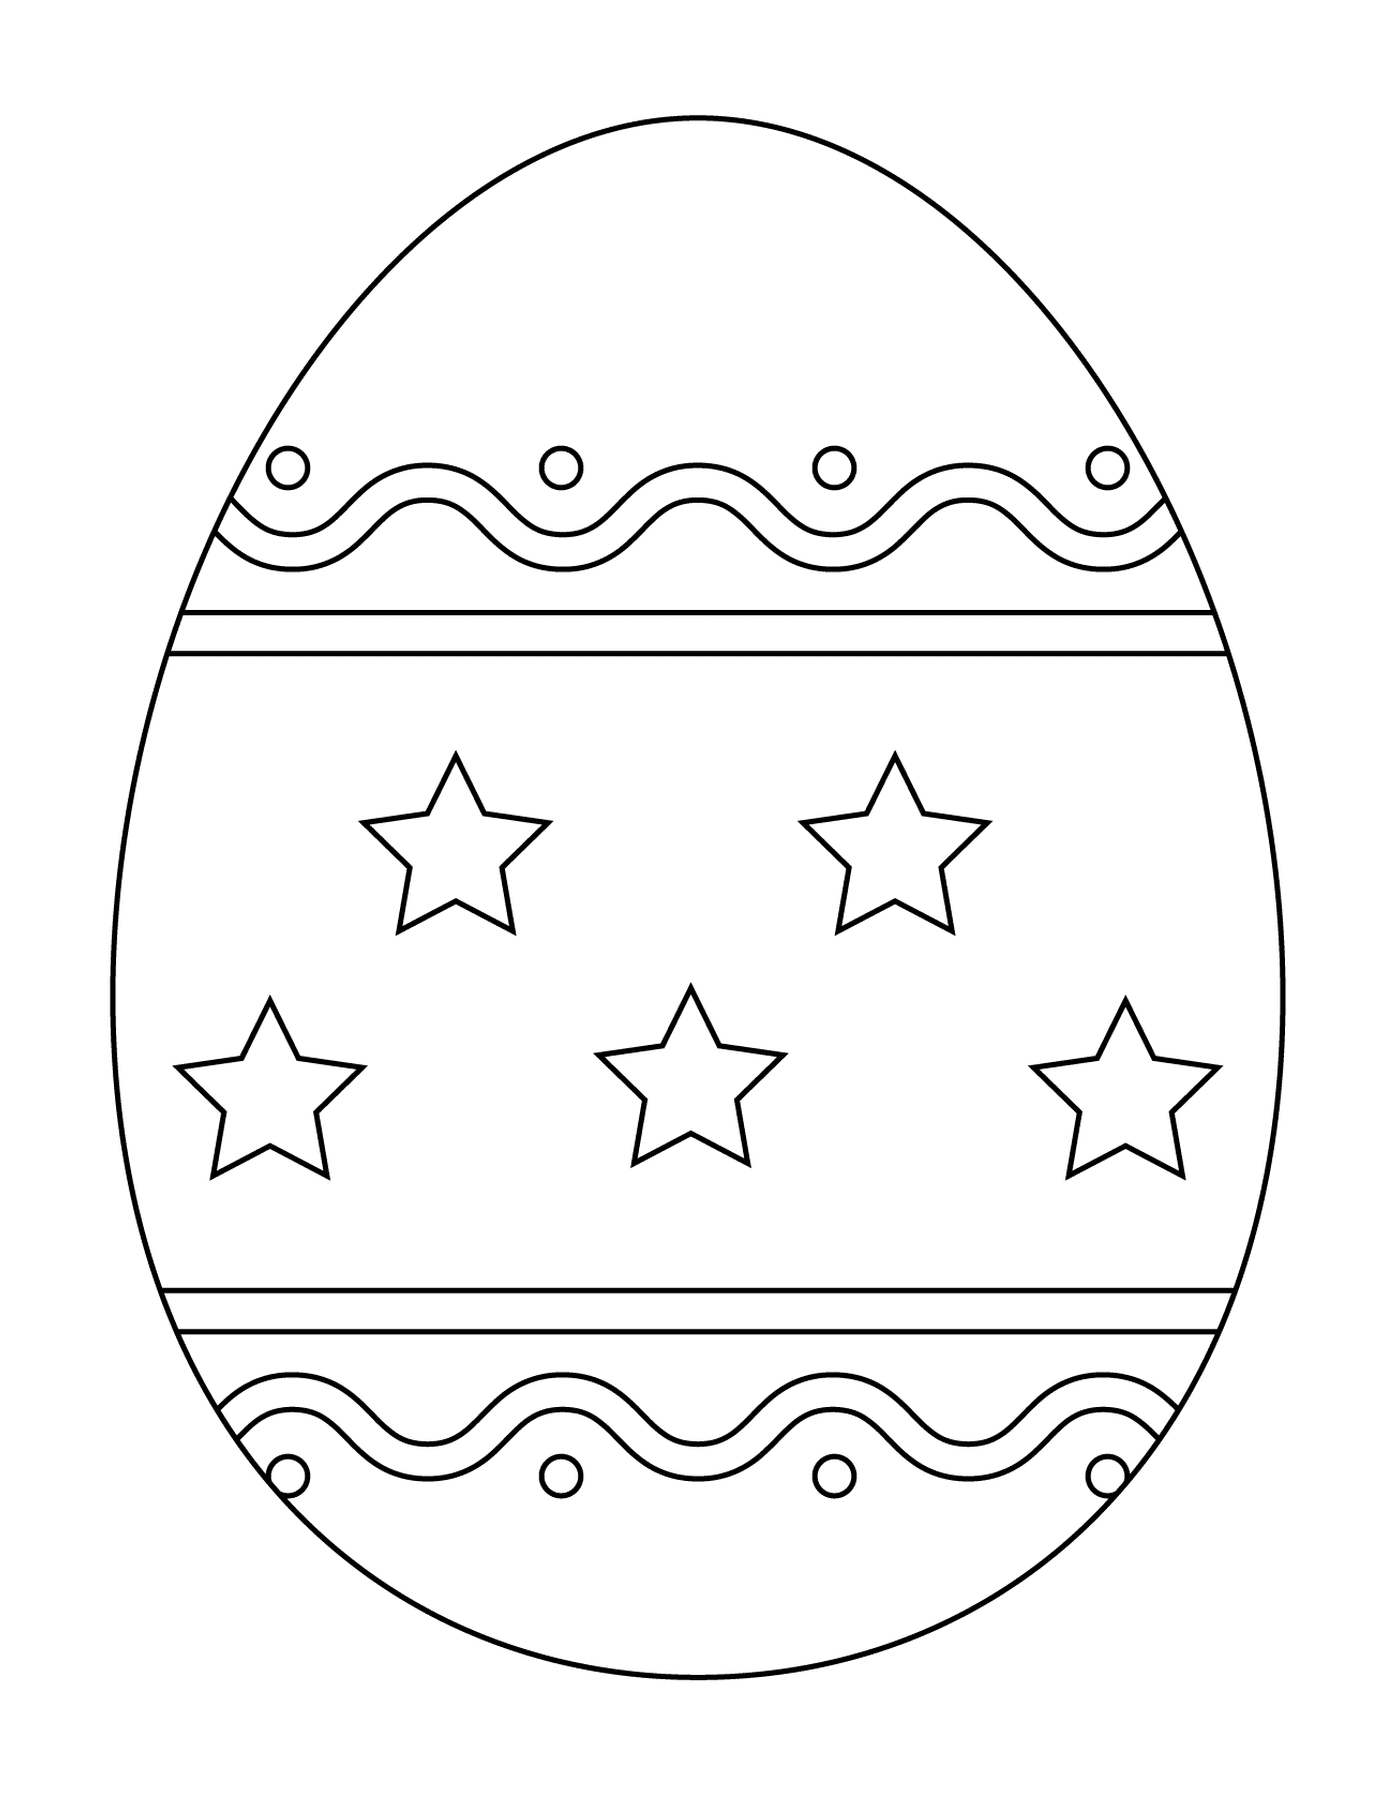  Easter egg with a simple pattern 